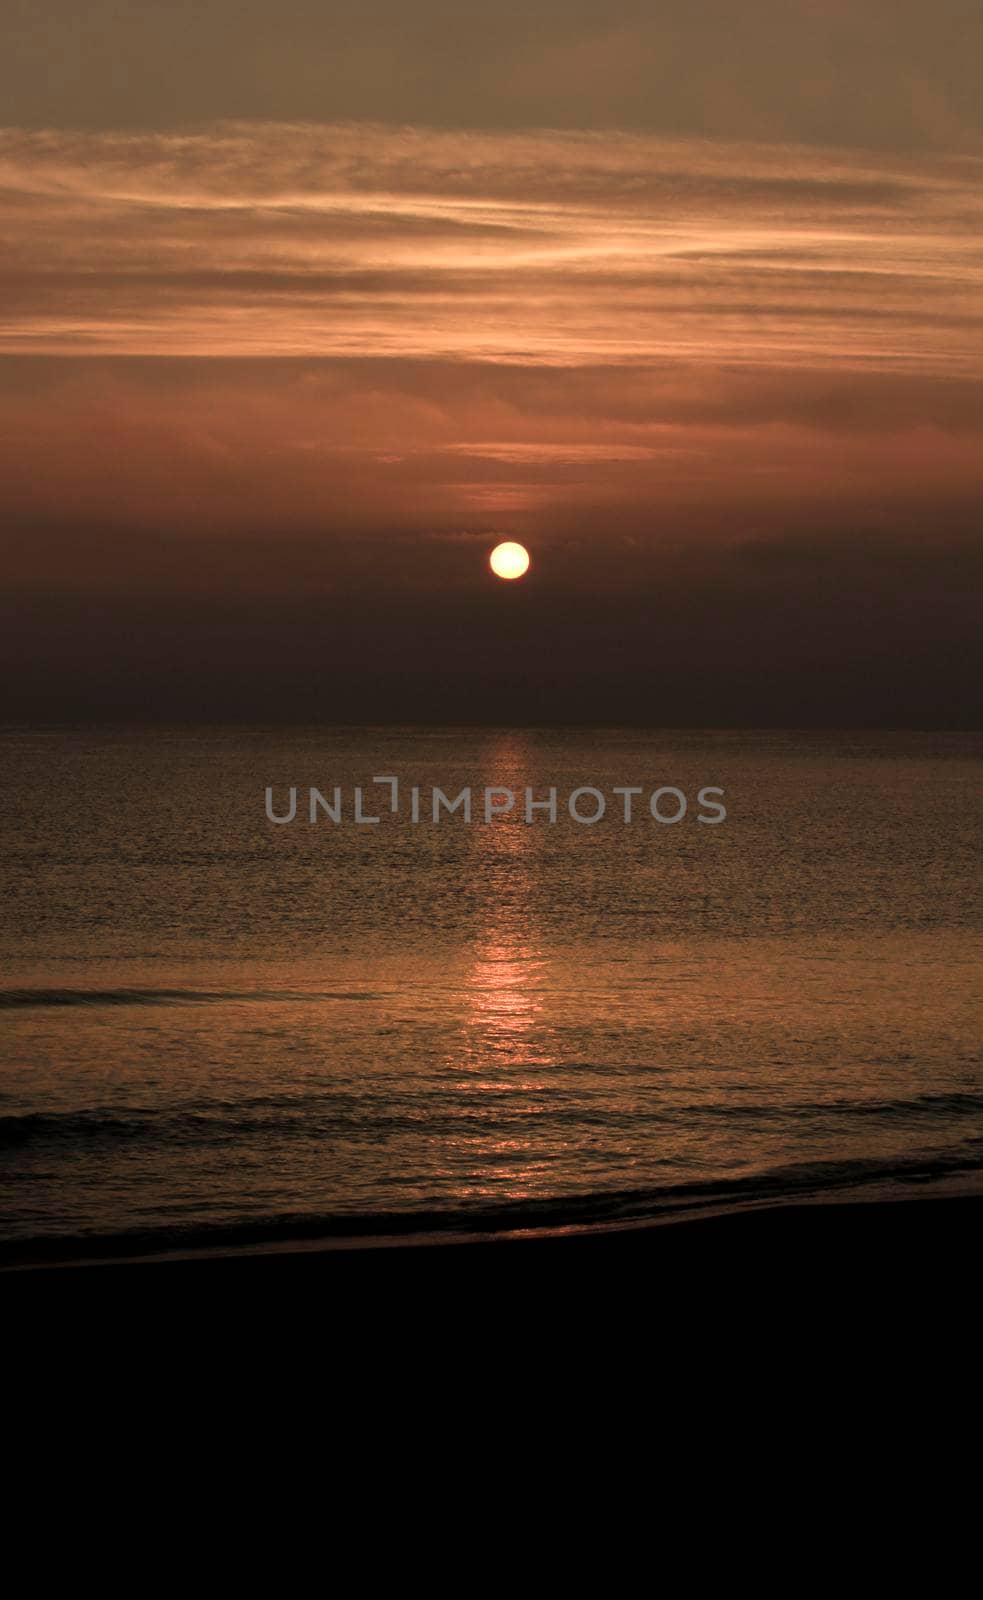 Sunrise on the beach in Arenales del Sol, Alicante by soniabonet